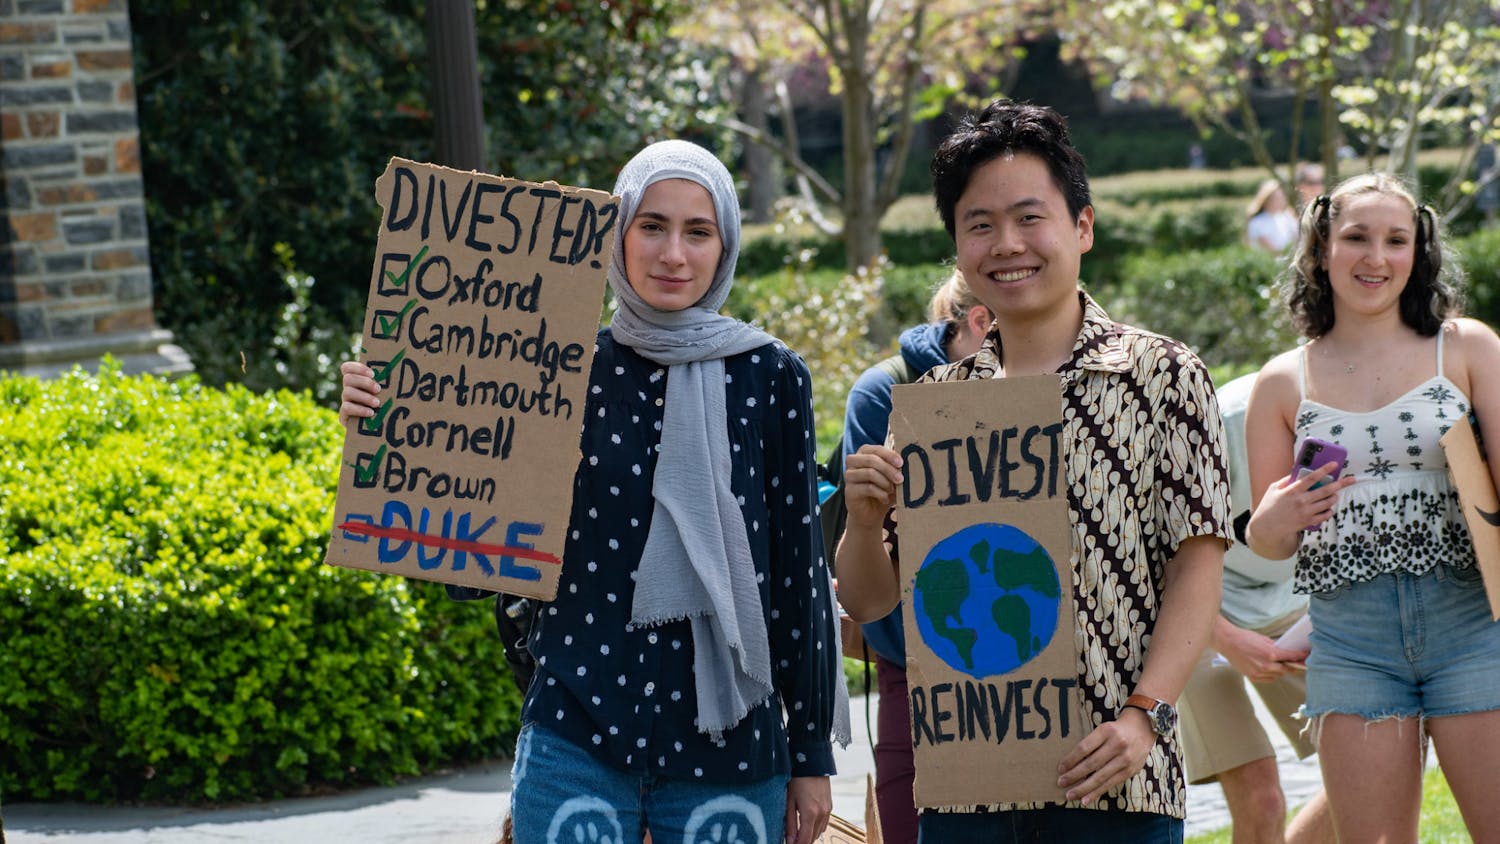 Students and supporters gathered to demand that Duke divest from fossil fuels, following a recent referendum overwhelmingly in favor of divestment, on April 6, 2022.&nbsp;